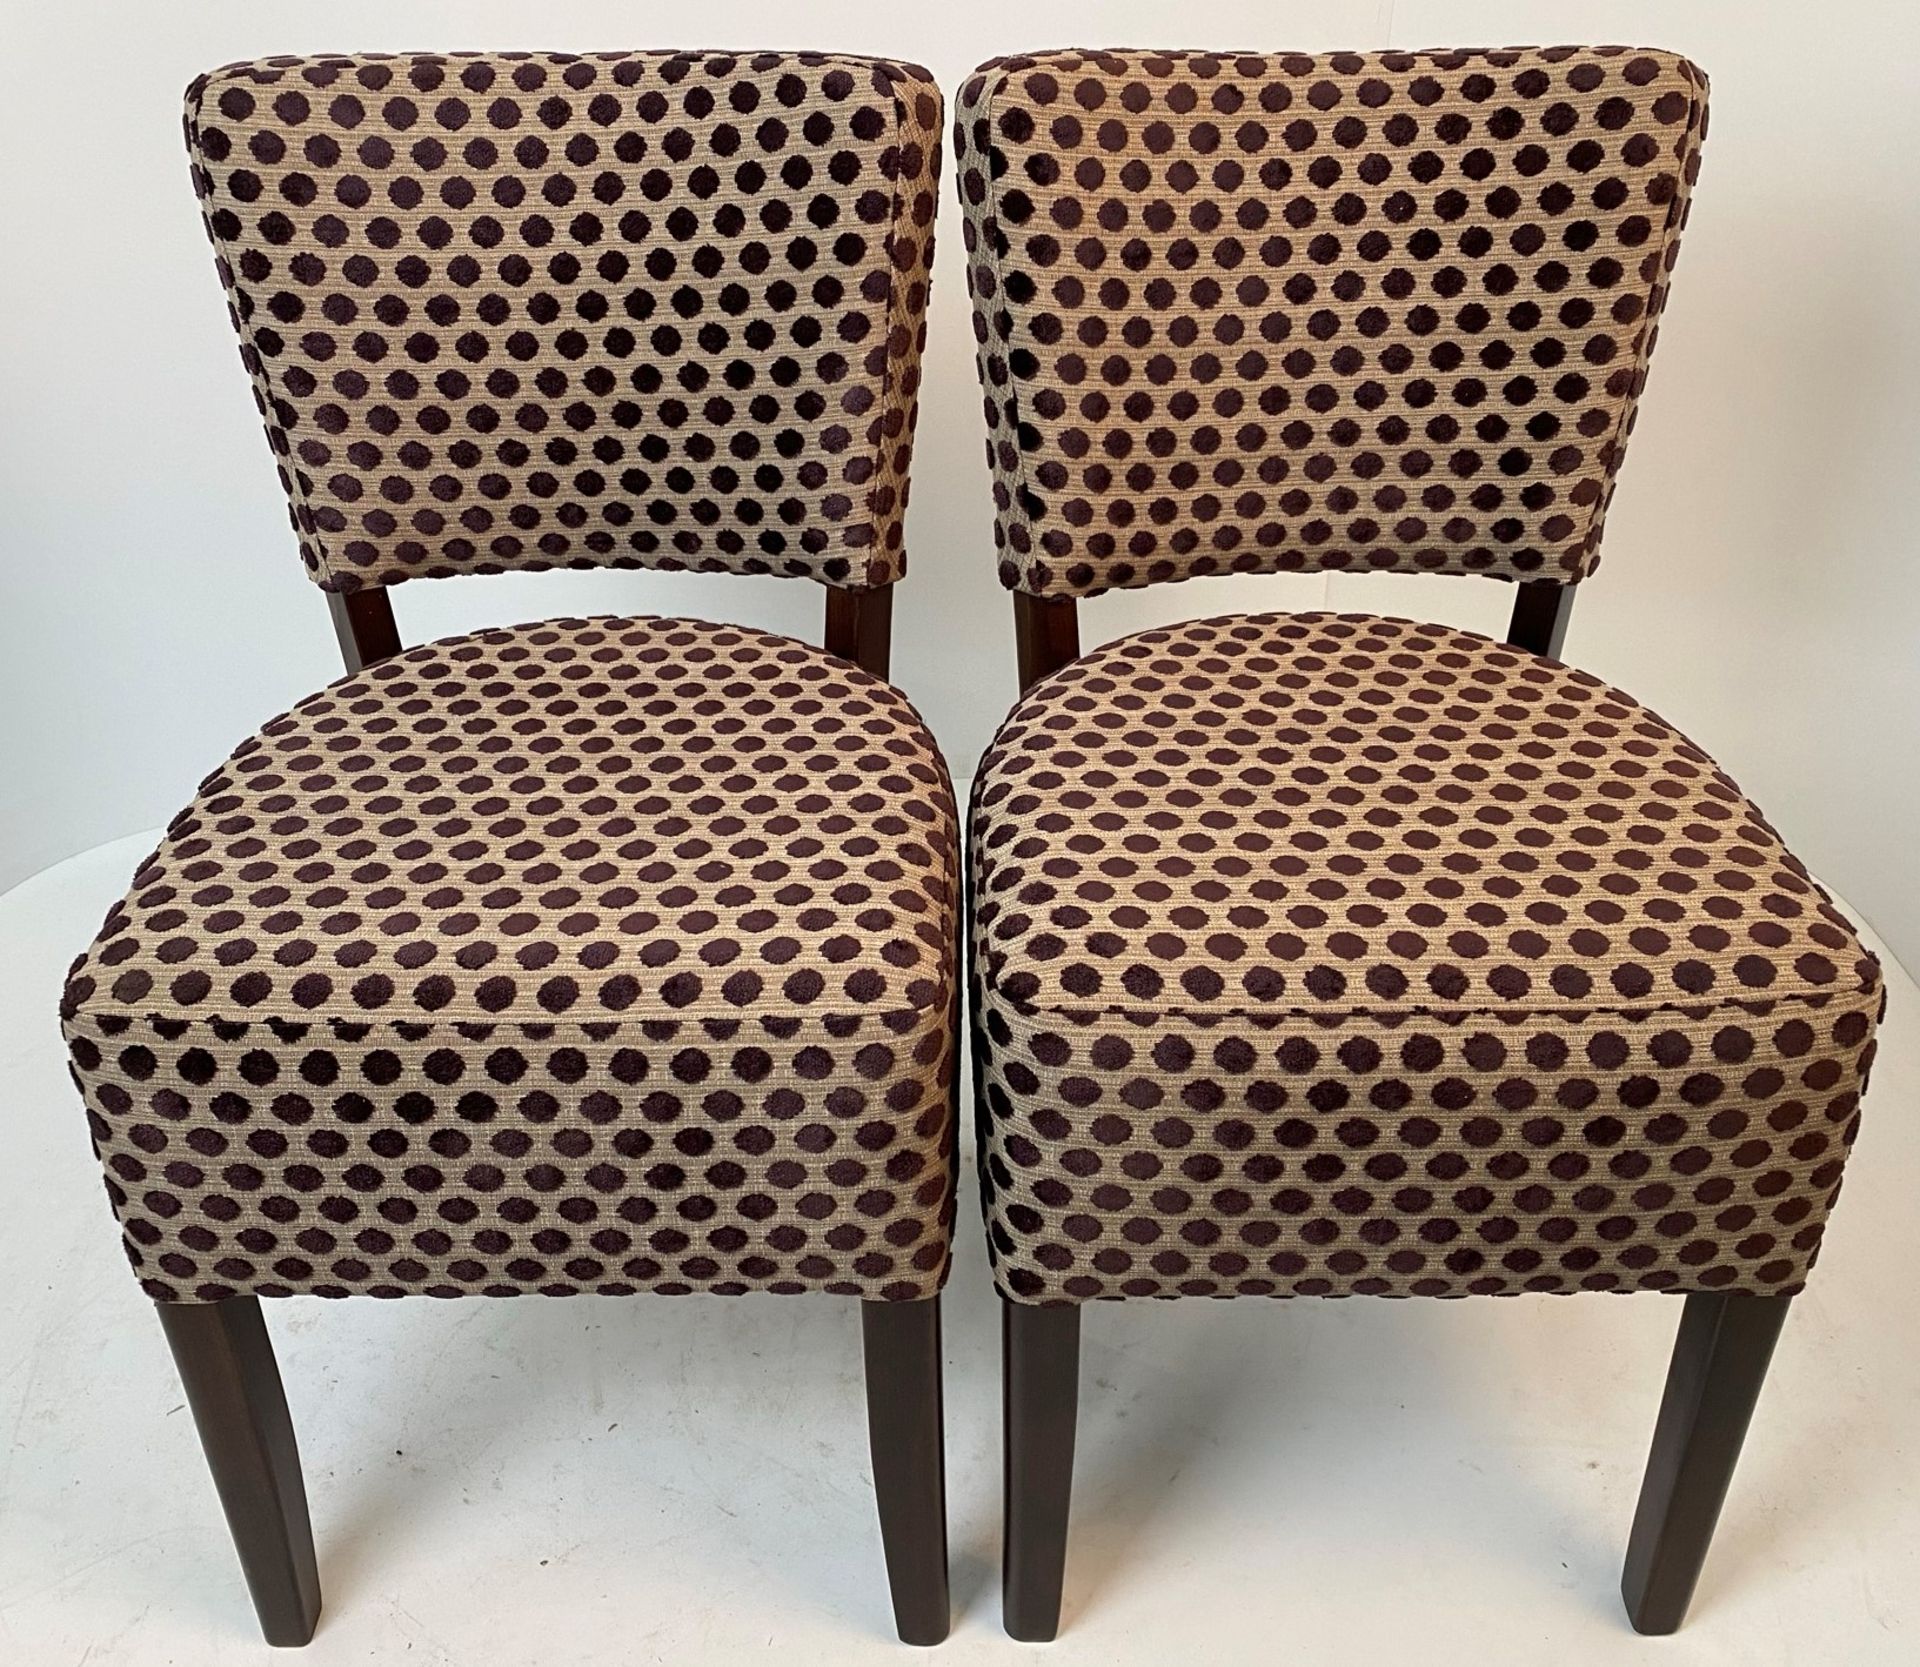 2 x Memphis Eno Aubergine 8102 side/dining chairs with walnut coloured frames